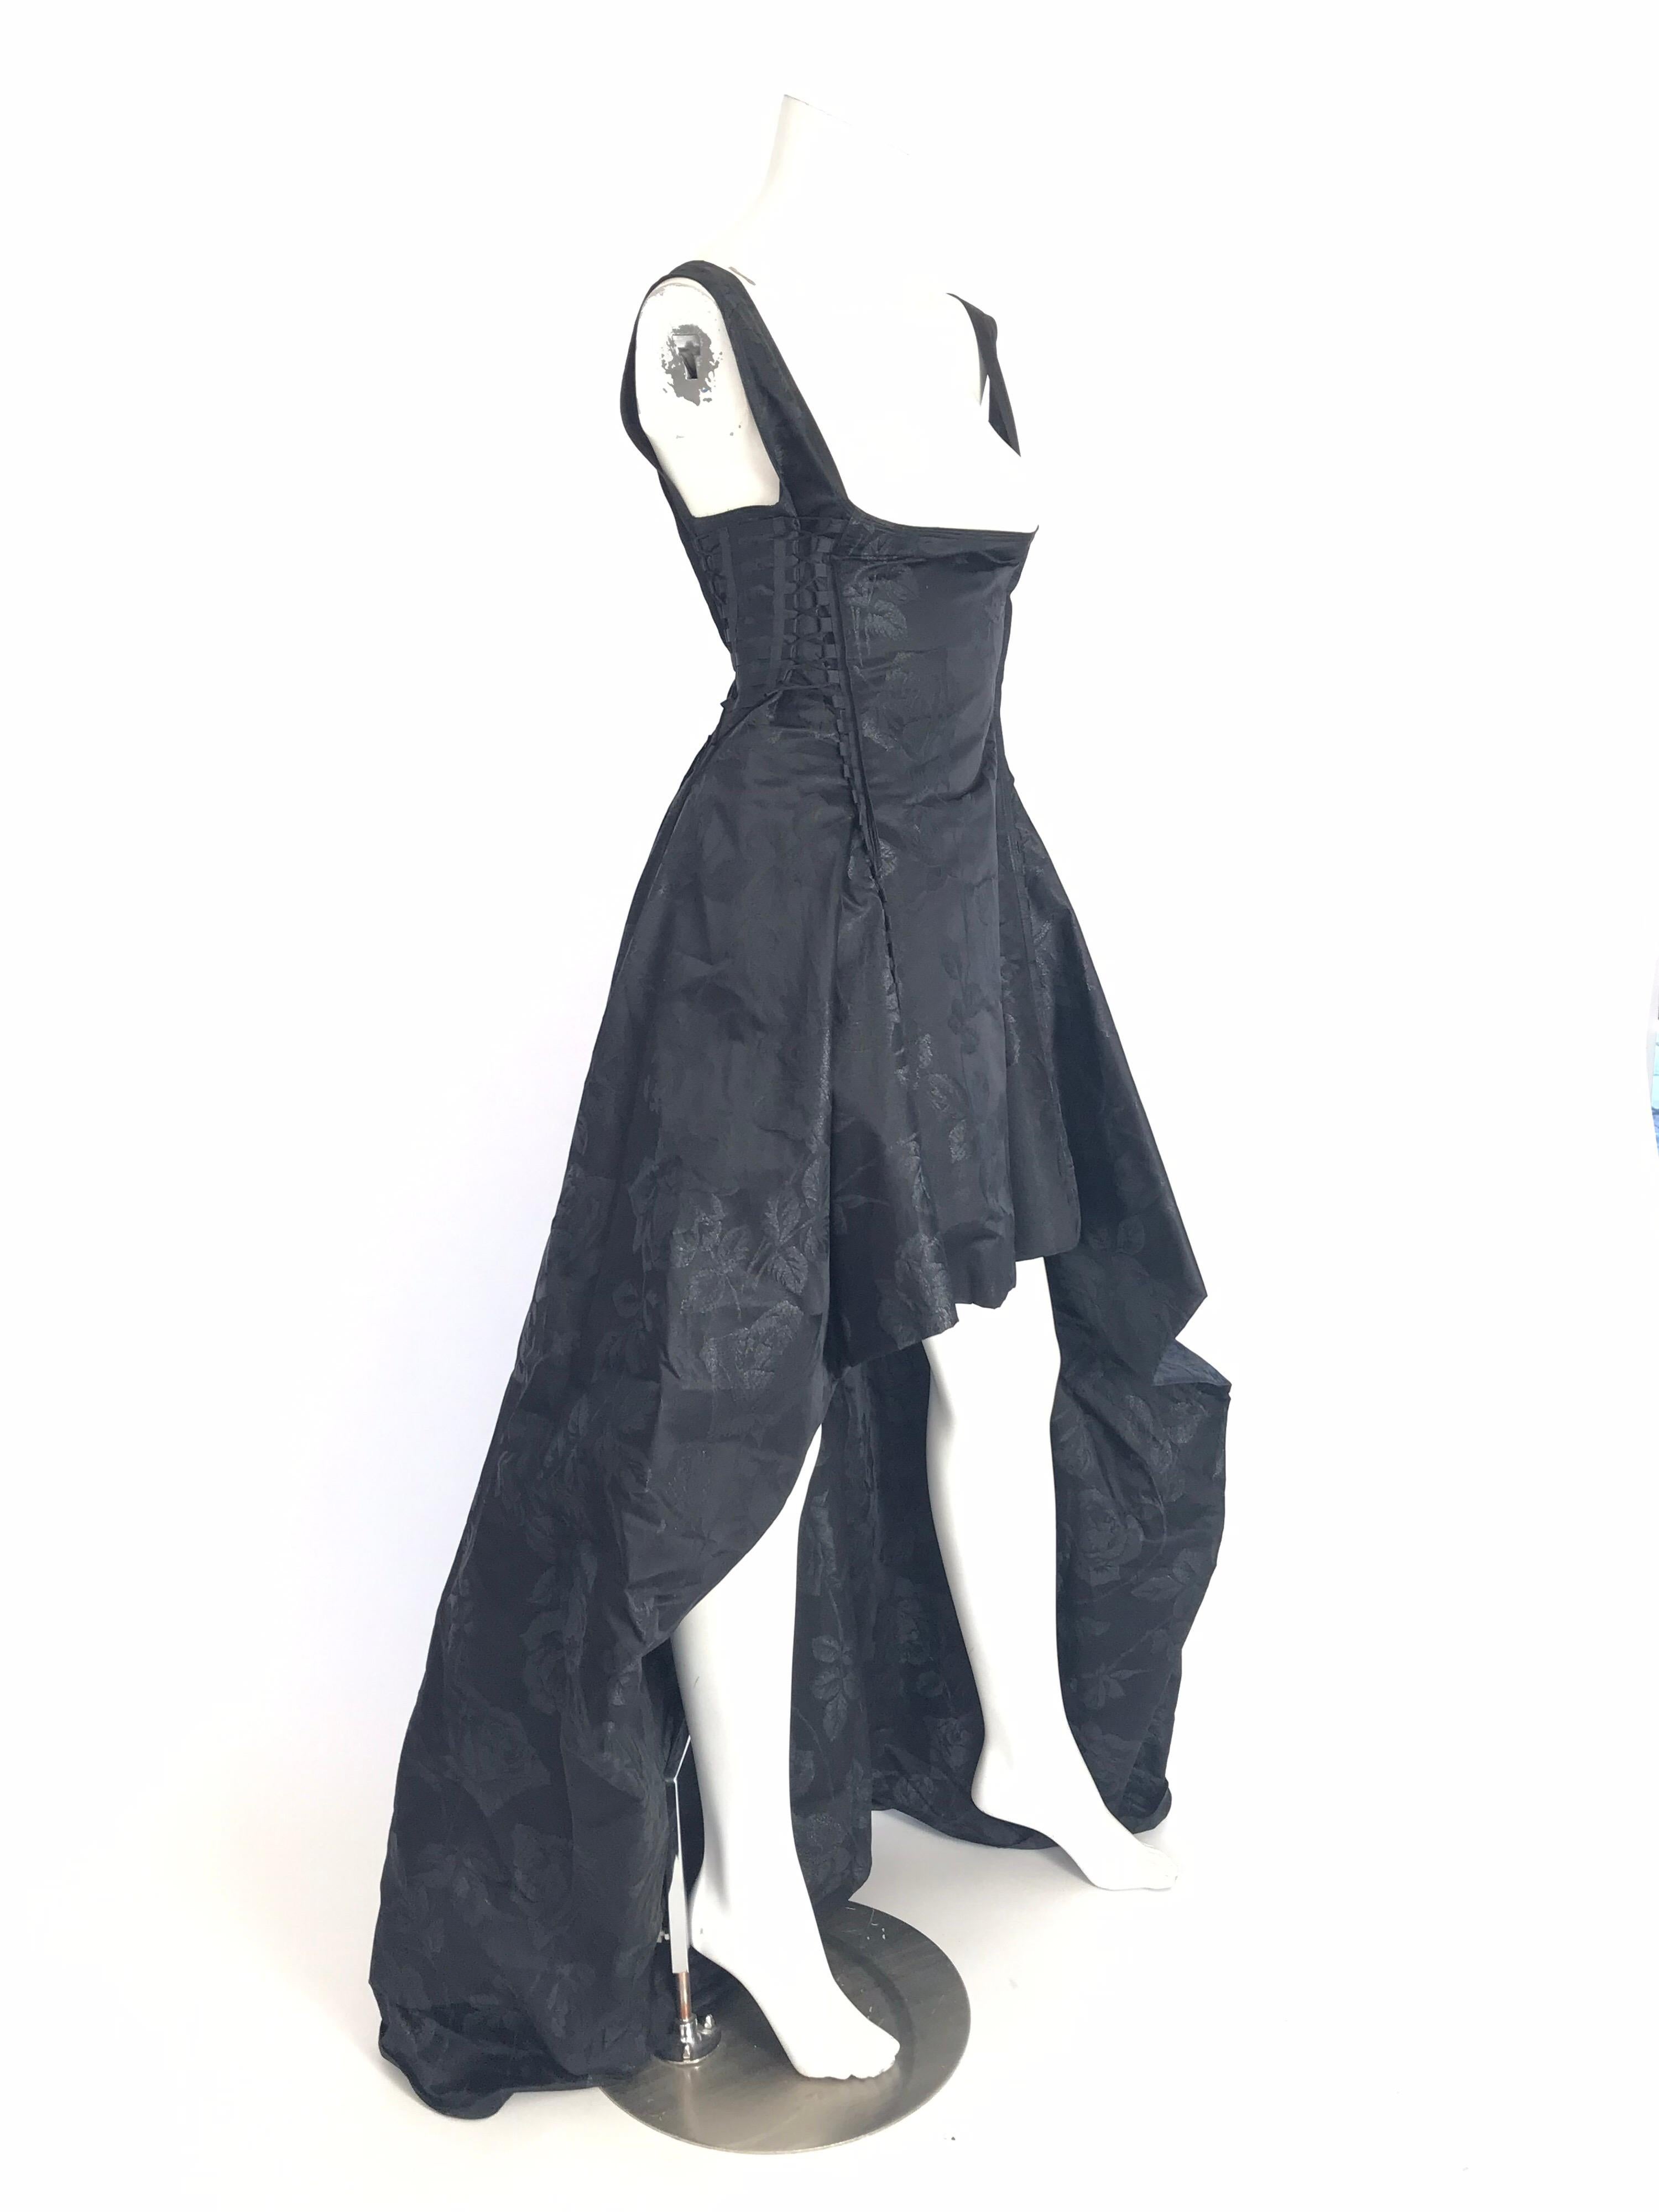 Jean Paul Gaultier black brocade evening dress with floral pattern throughout, lacing at sides, high-low hem and zip closure at back.  Silk blend. Condition: Excellent

Bust: 28